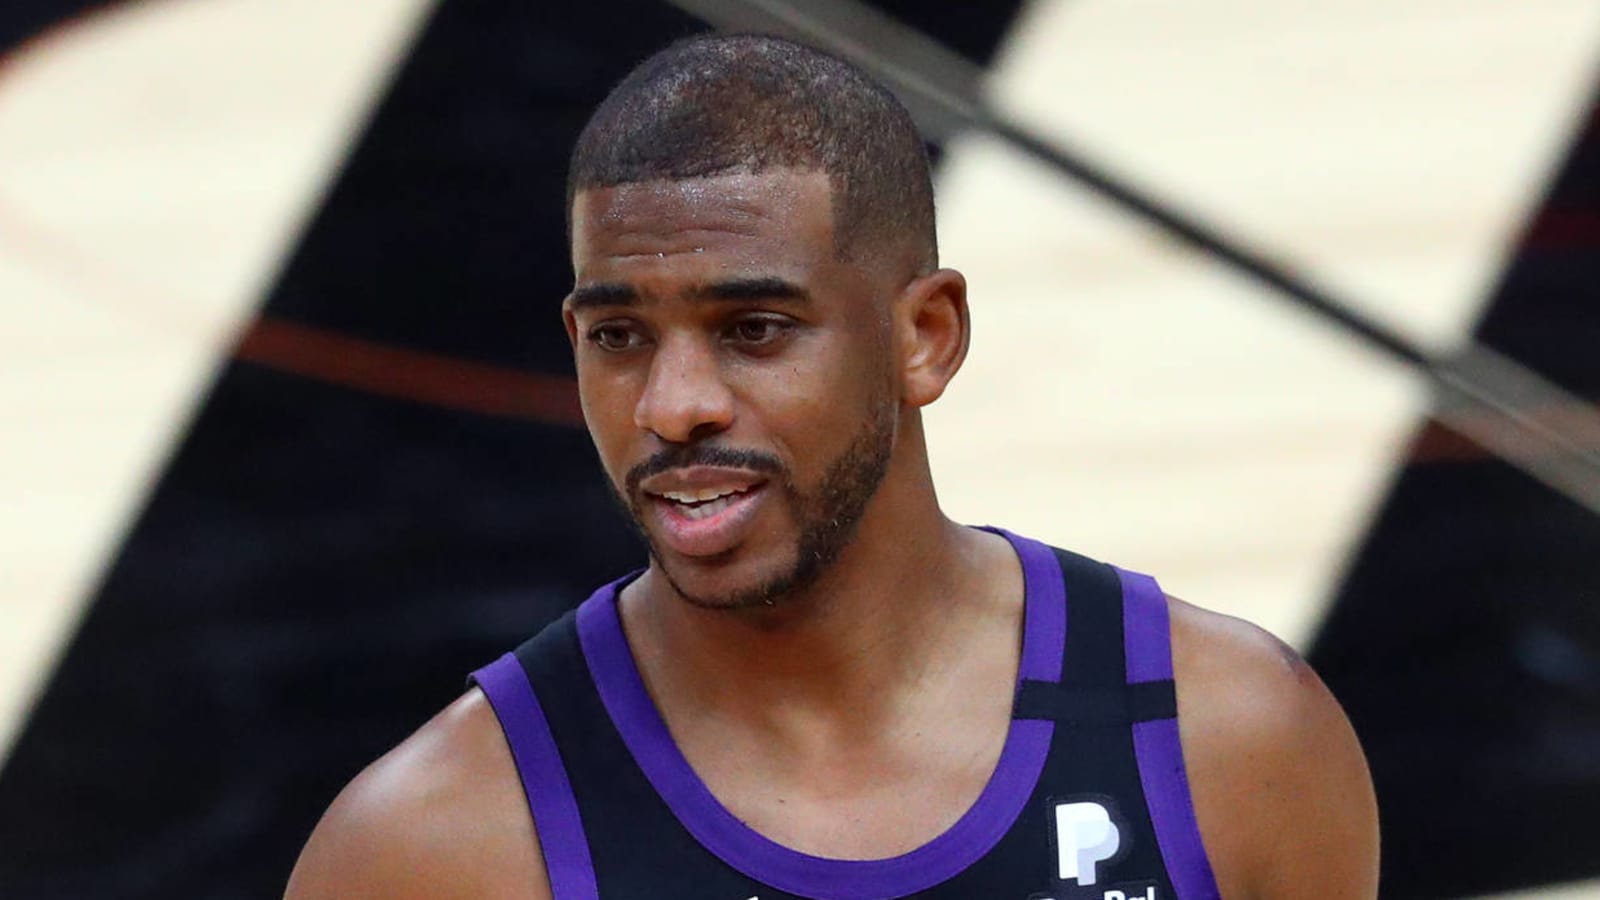 Chris Paul against sitting out games for load management